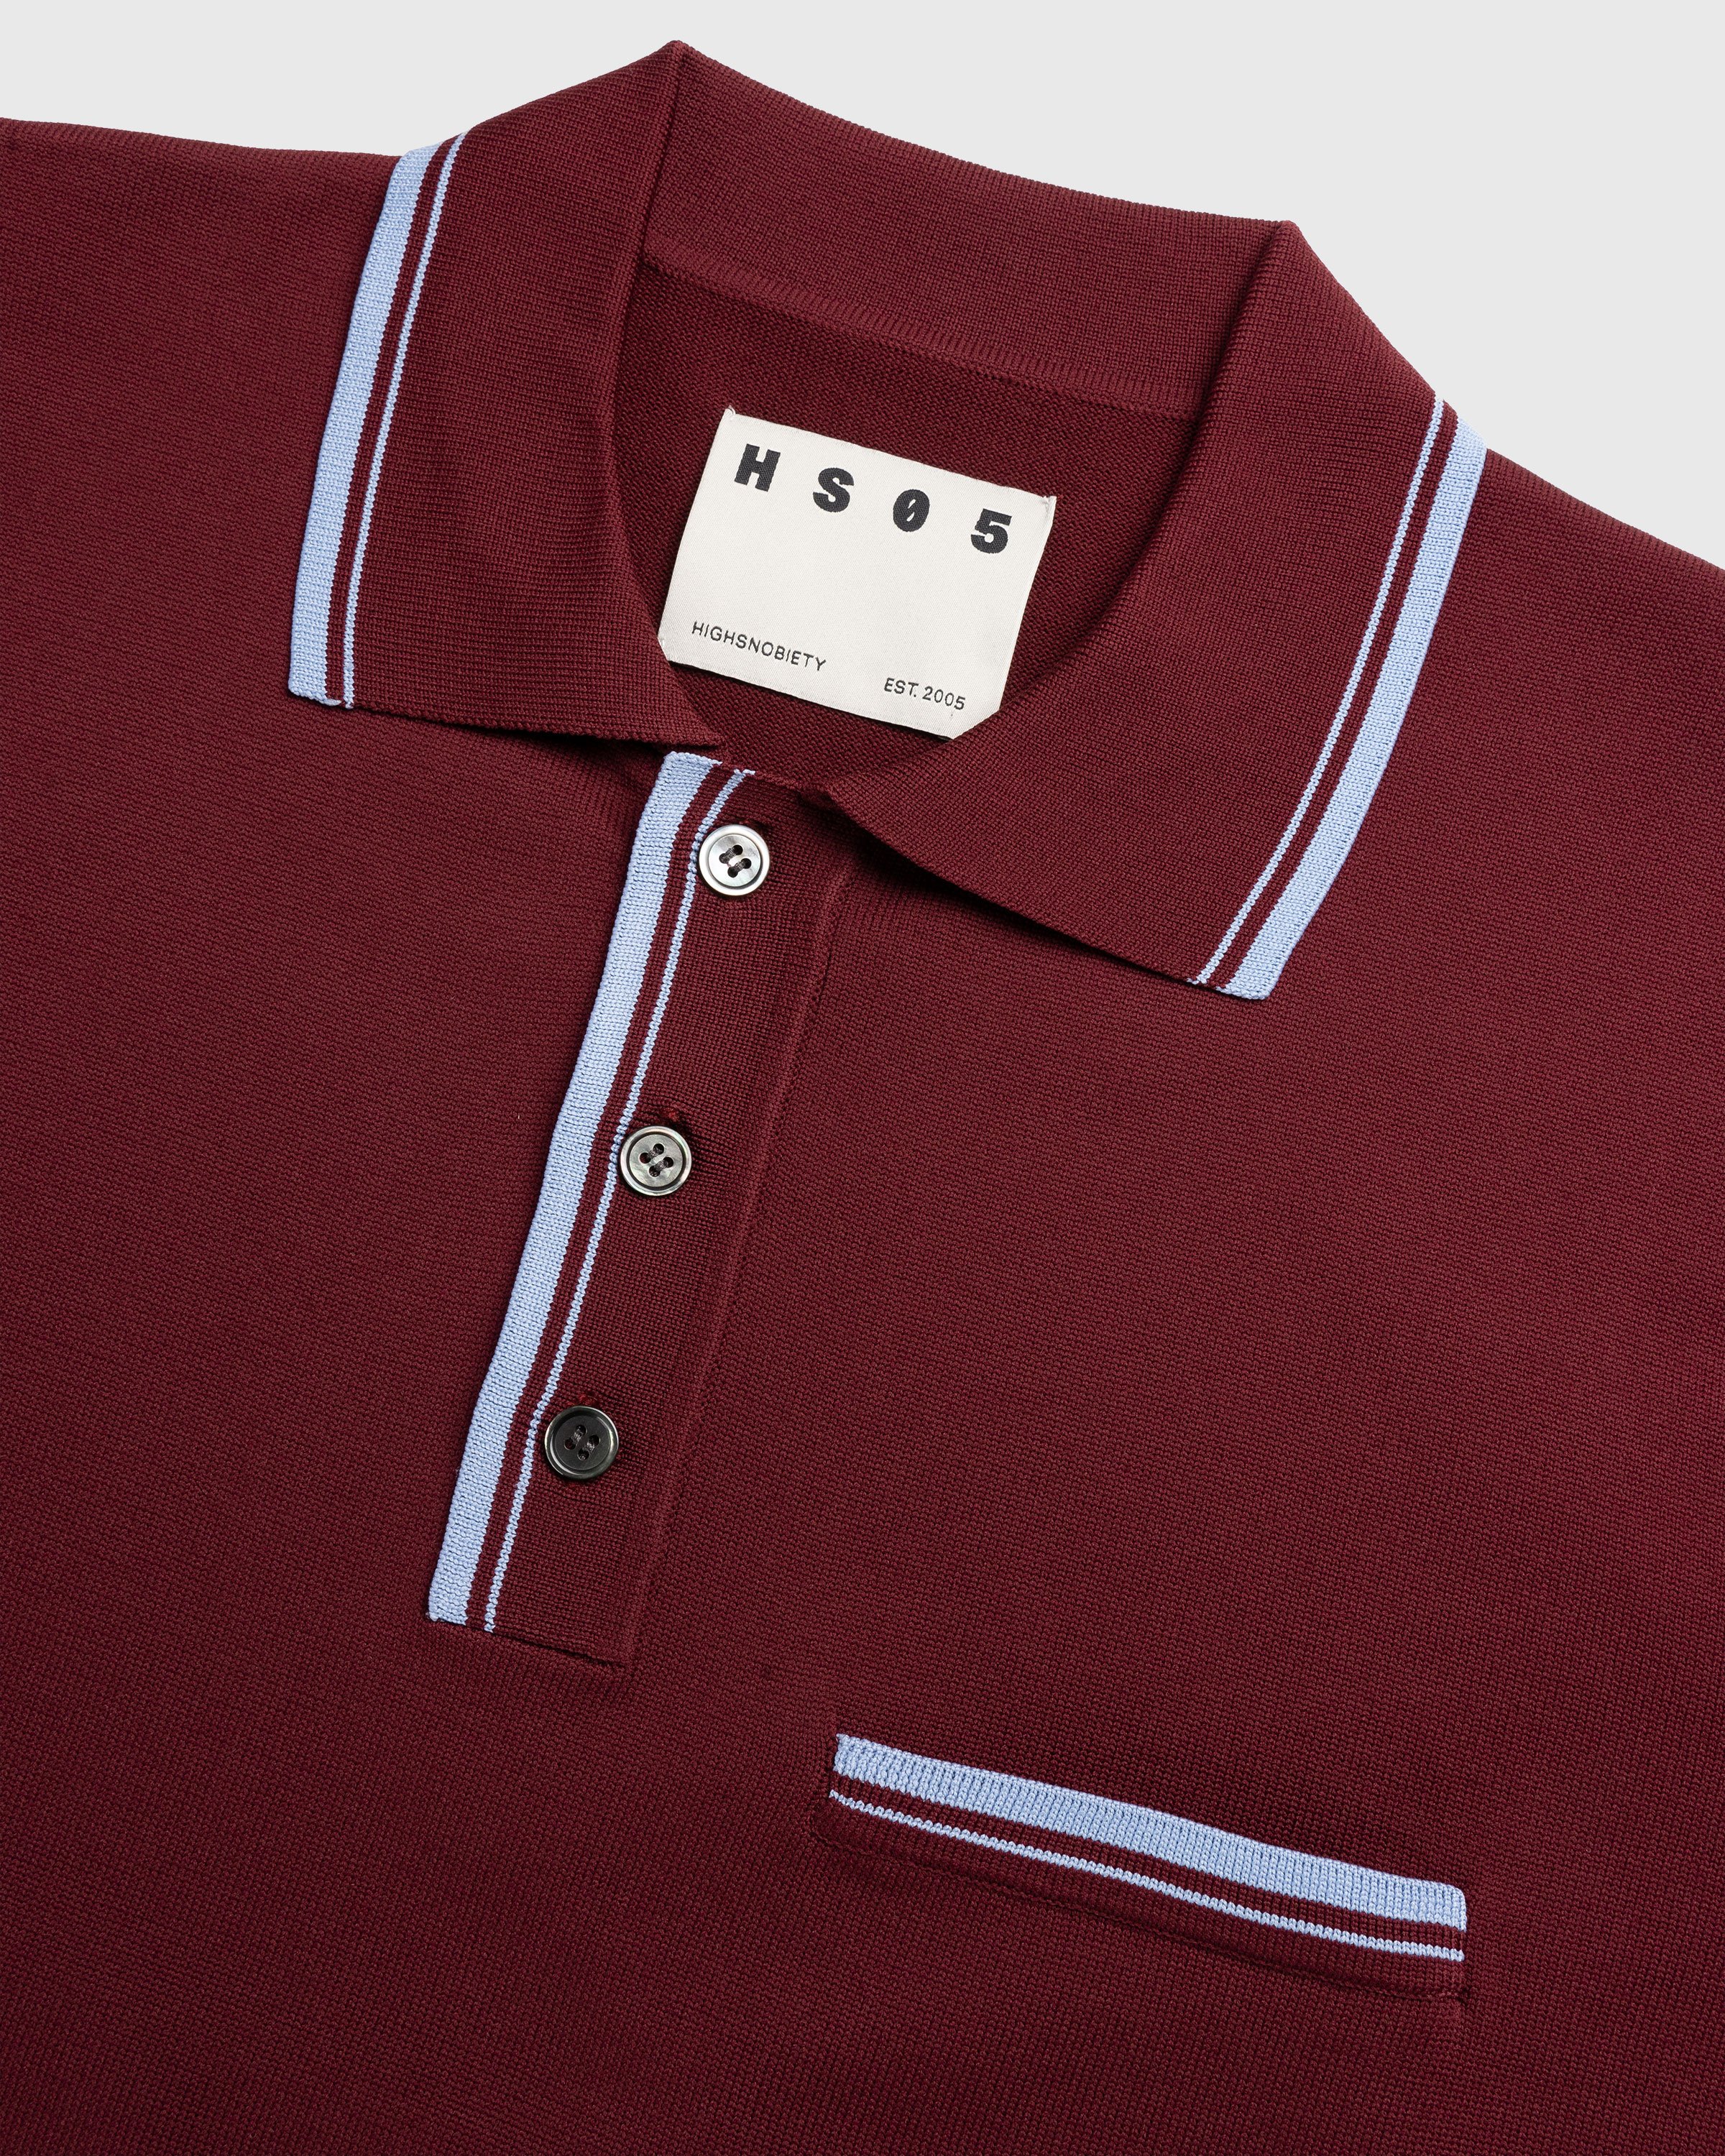 Highsnobiety HS05 - Long Sleeves Knit Polo Bordeaux - Clothing - Red - Image 6